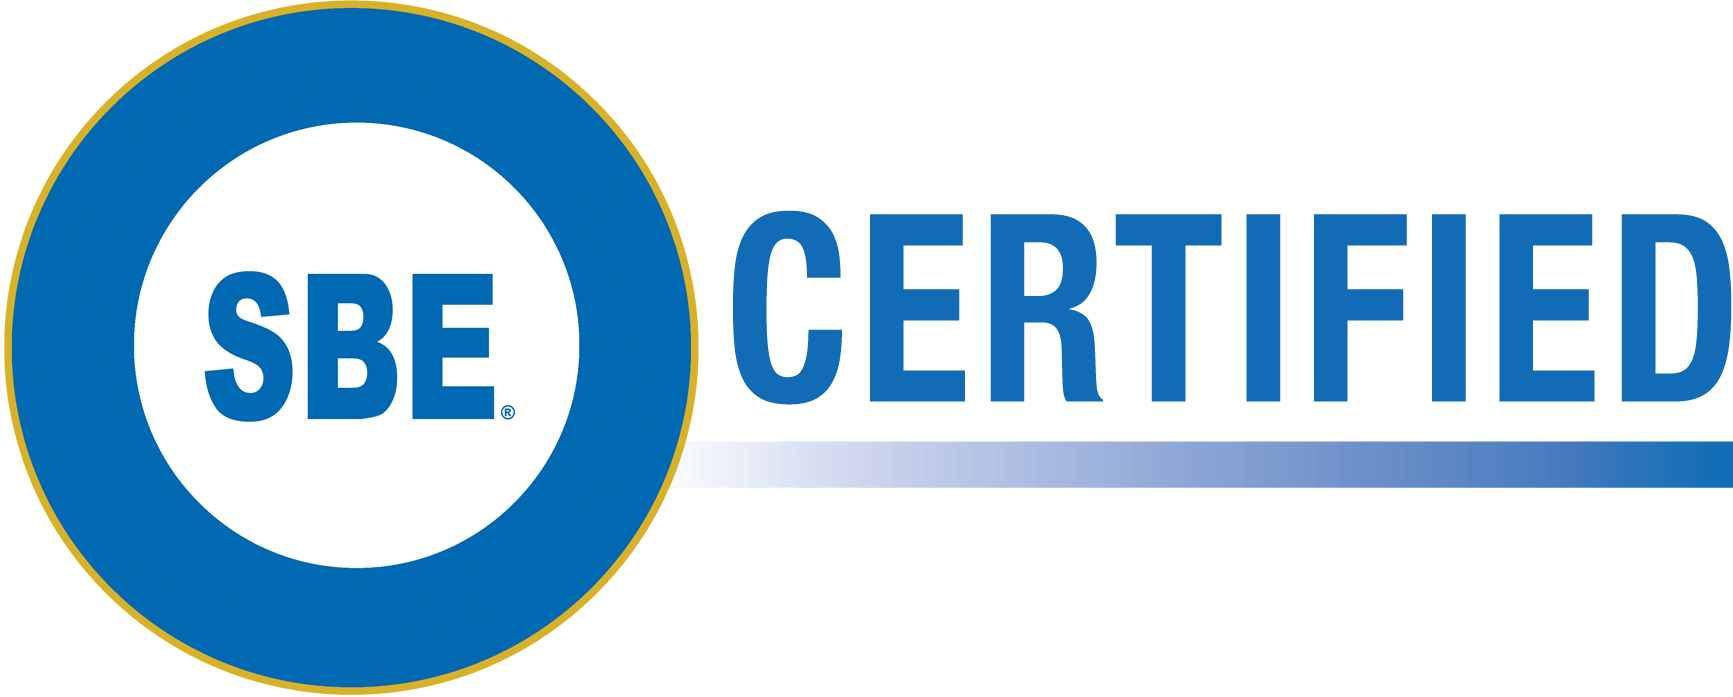 Certified Logo - Society of Broadcast Engineers